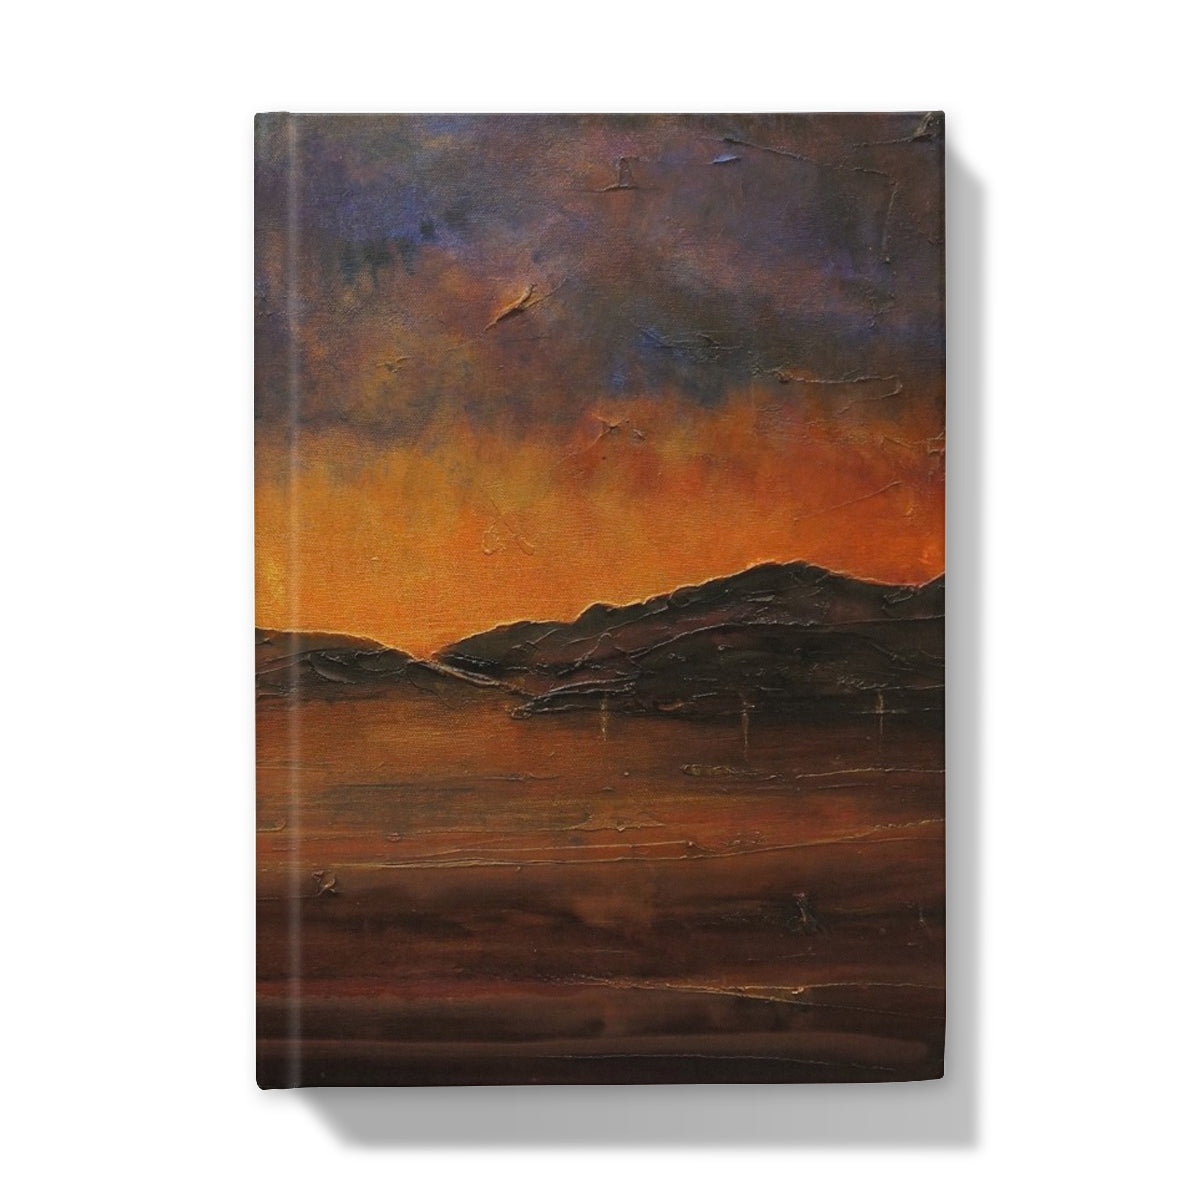 A Brooding Clyde Dusk Art Gifts Hardback Journal-Journals & Notebooks-River Clyde Art Gallery-A5-Lined-Paintings, Prints, Homeware, Art Gifts From Scotland By Scottish Artist Kevin Hunter